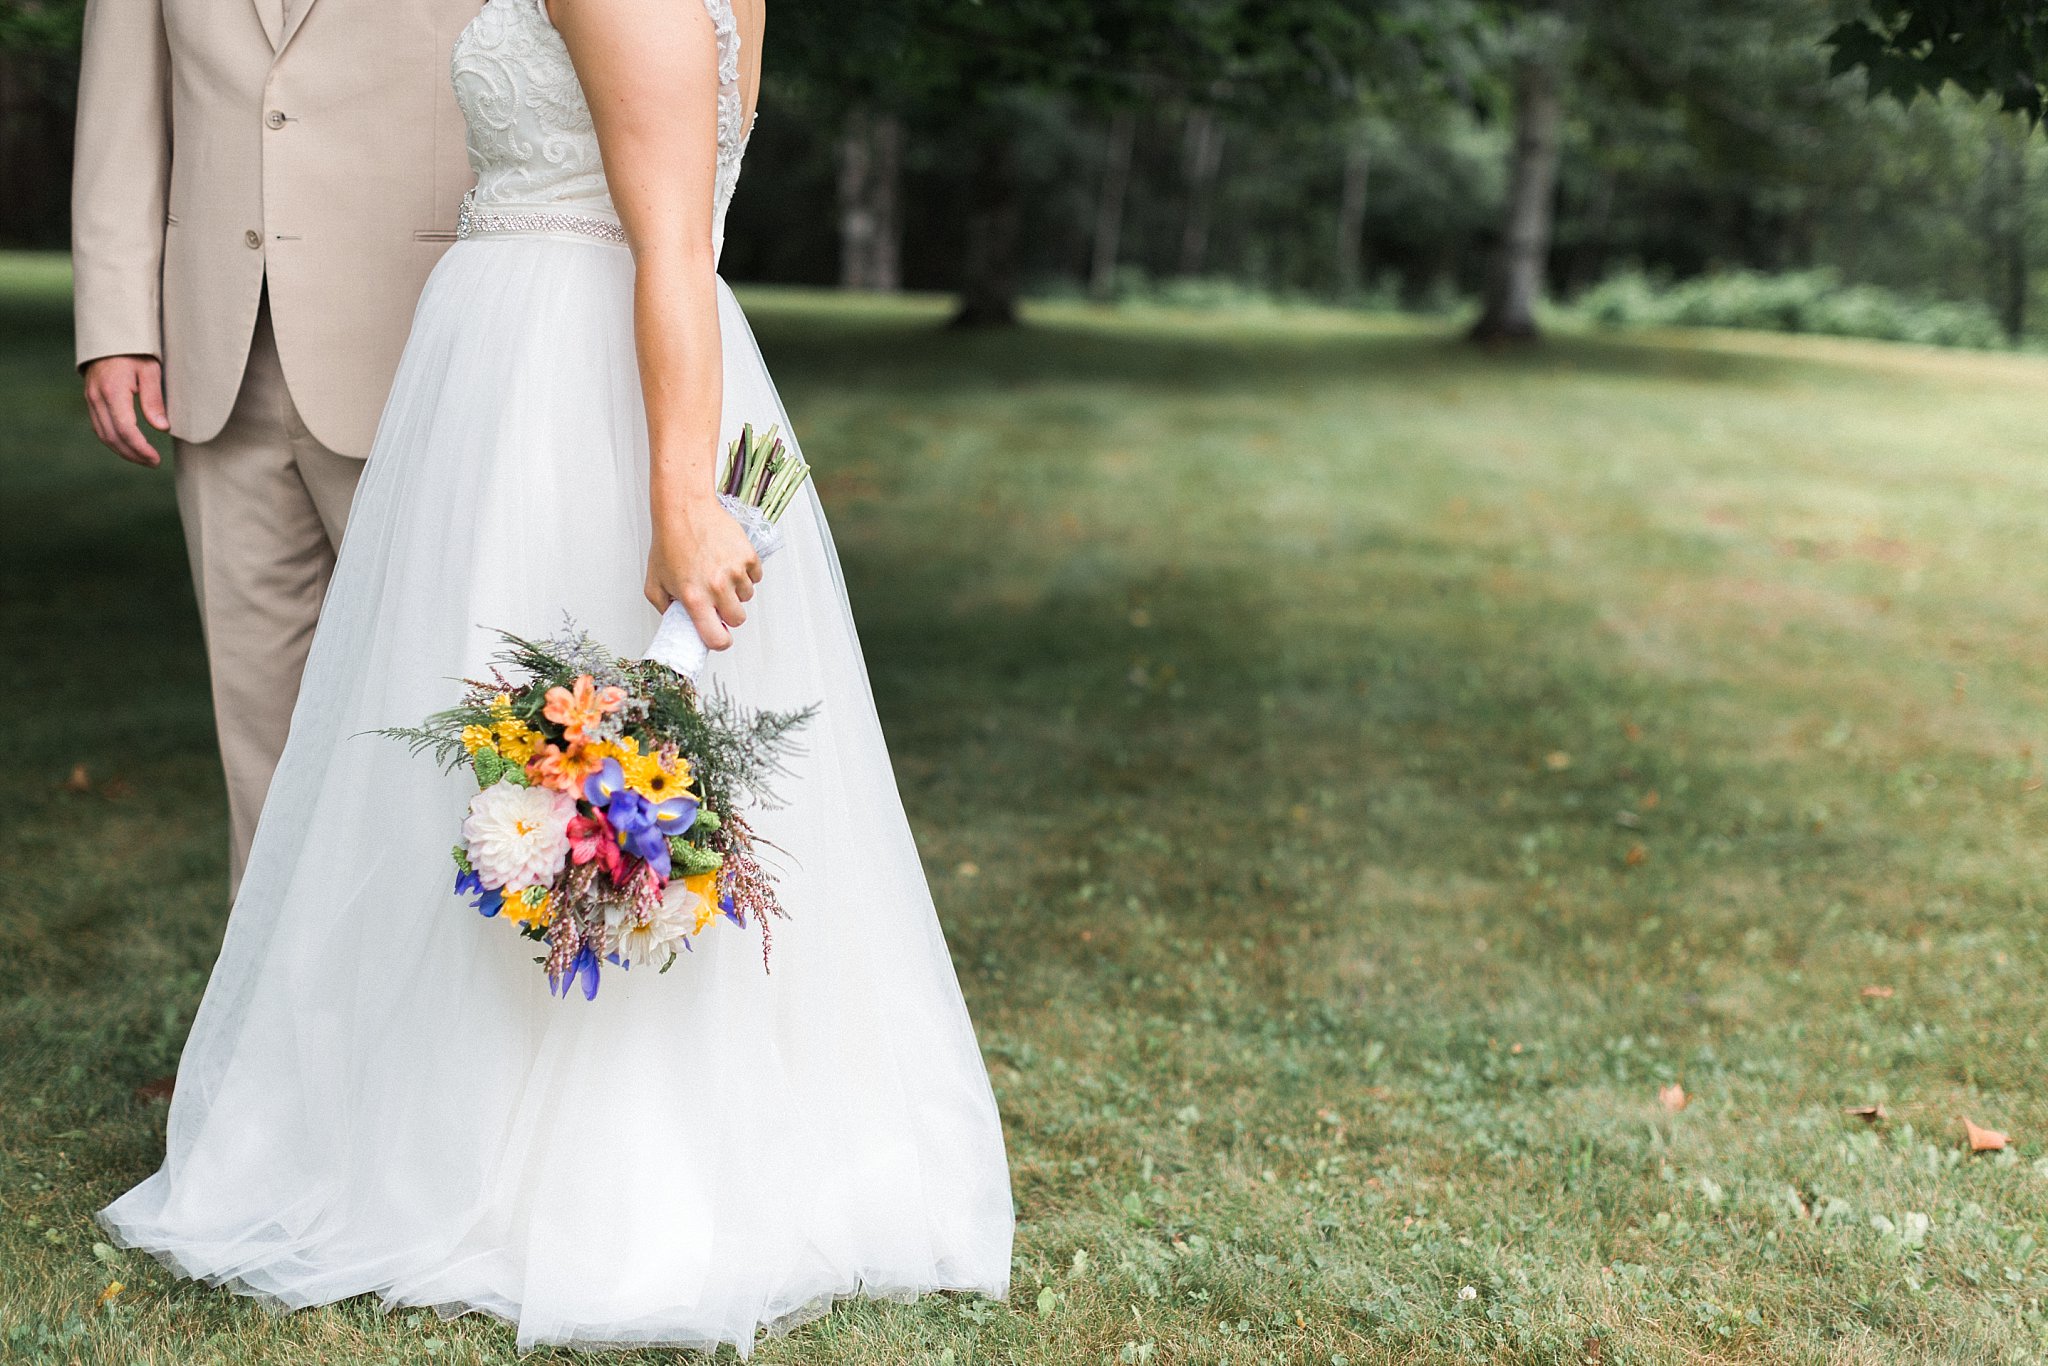 www.james-stokes.com | James Stokes Photography, LLC - Bride and bouquet outdoor wedding photo